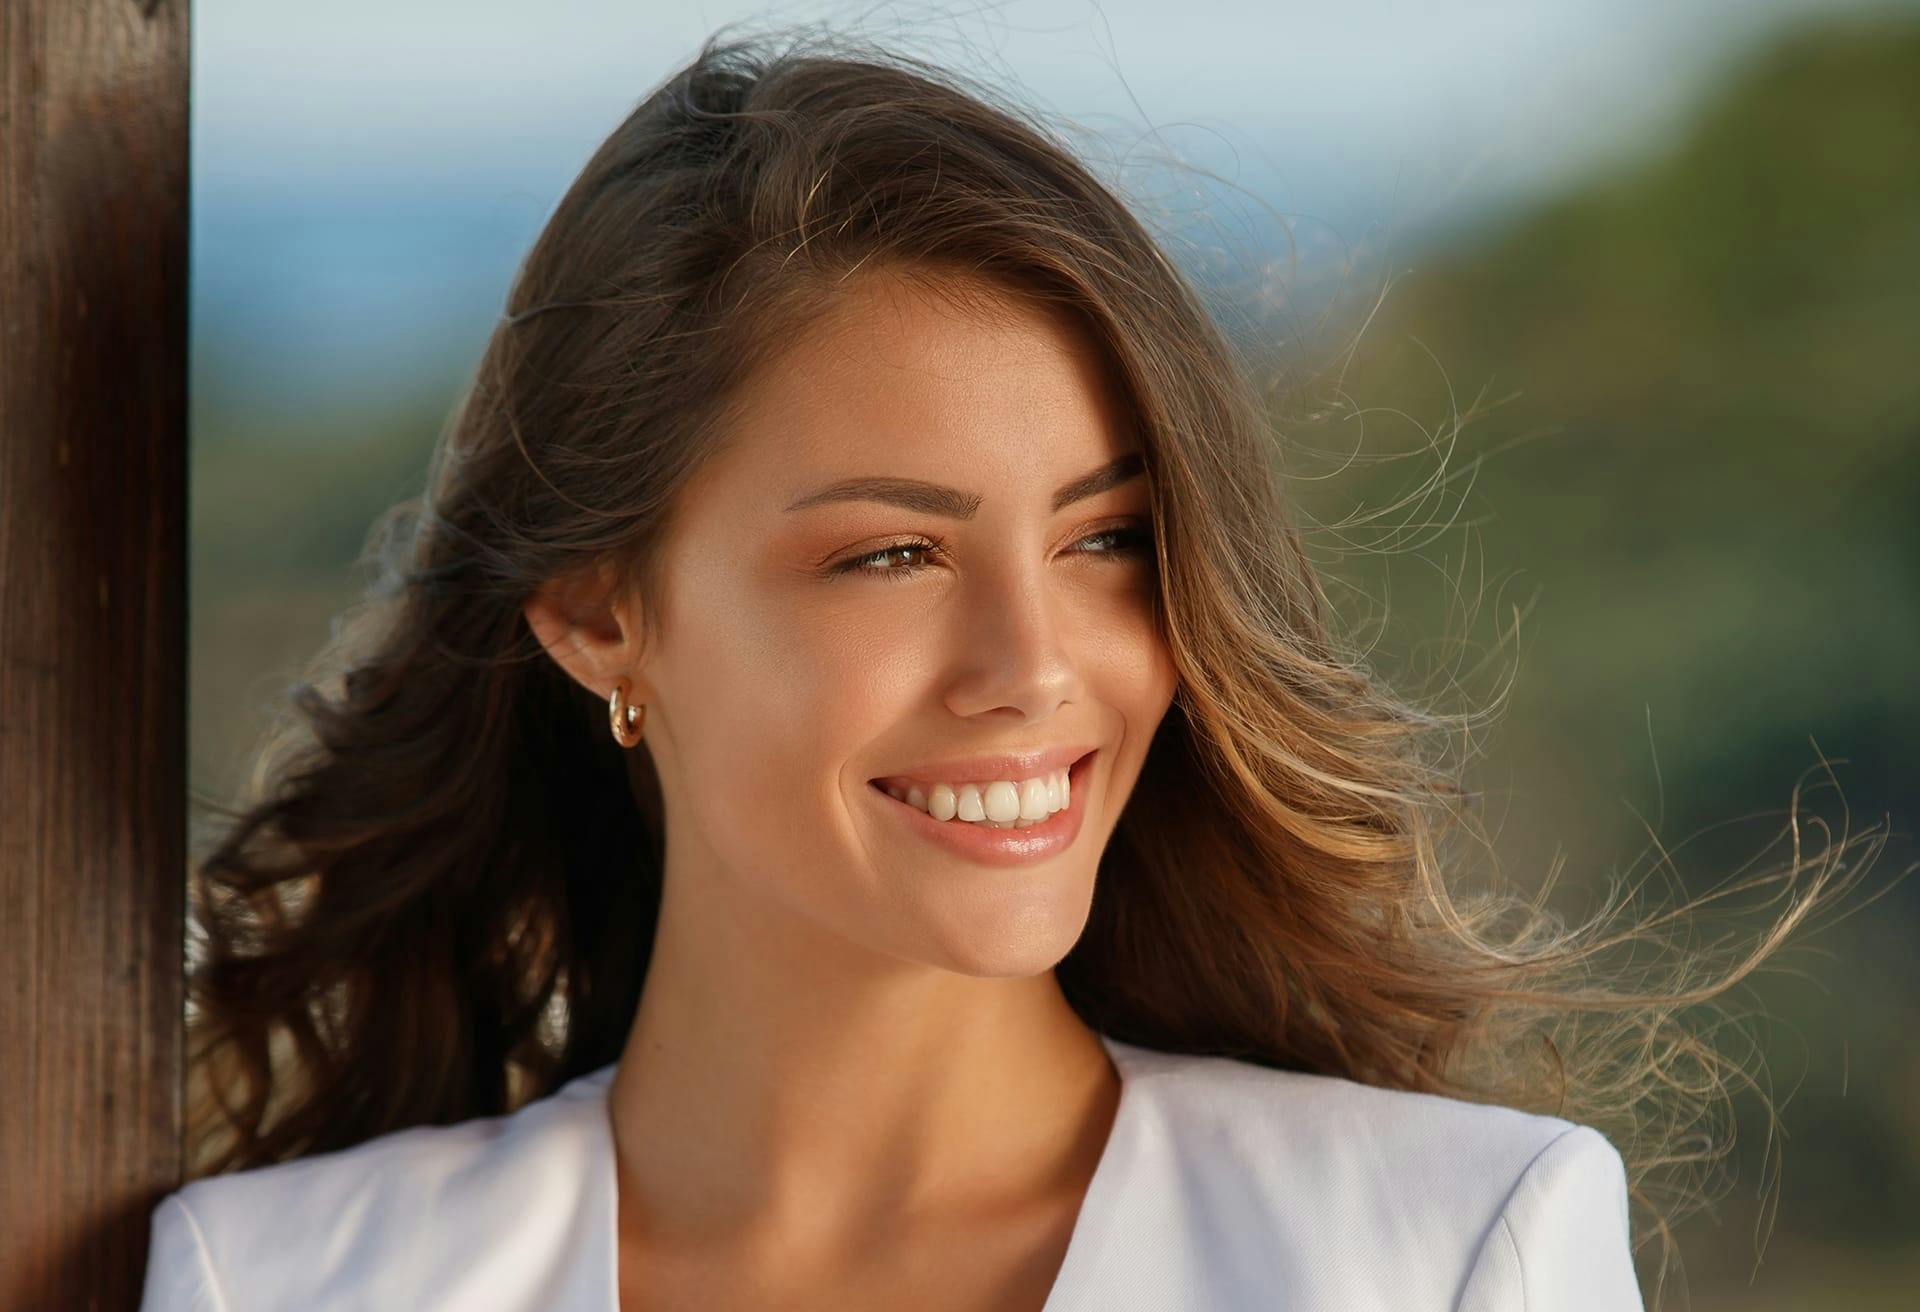 Woman smiling while her hair is being blown back by the wind